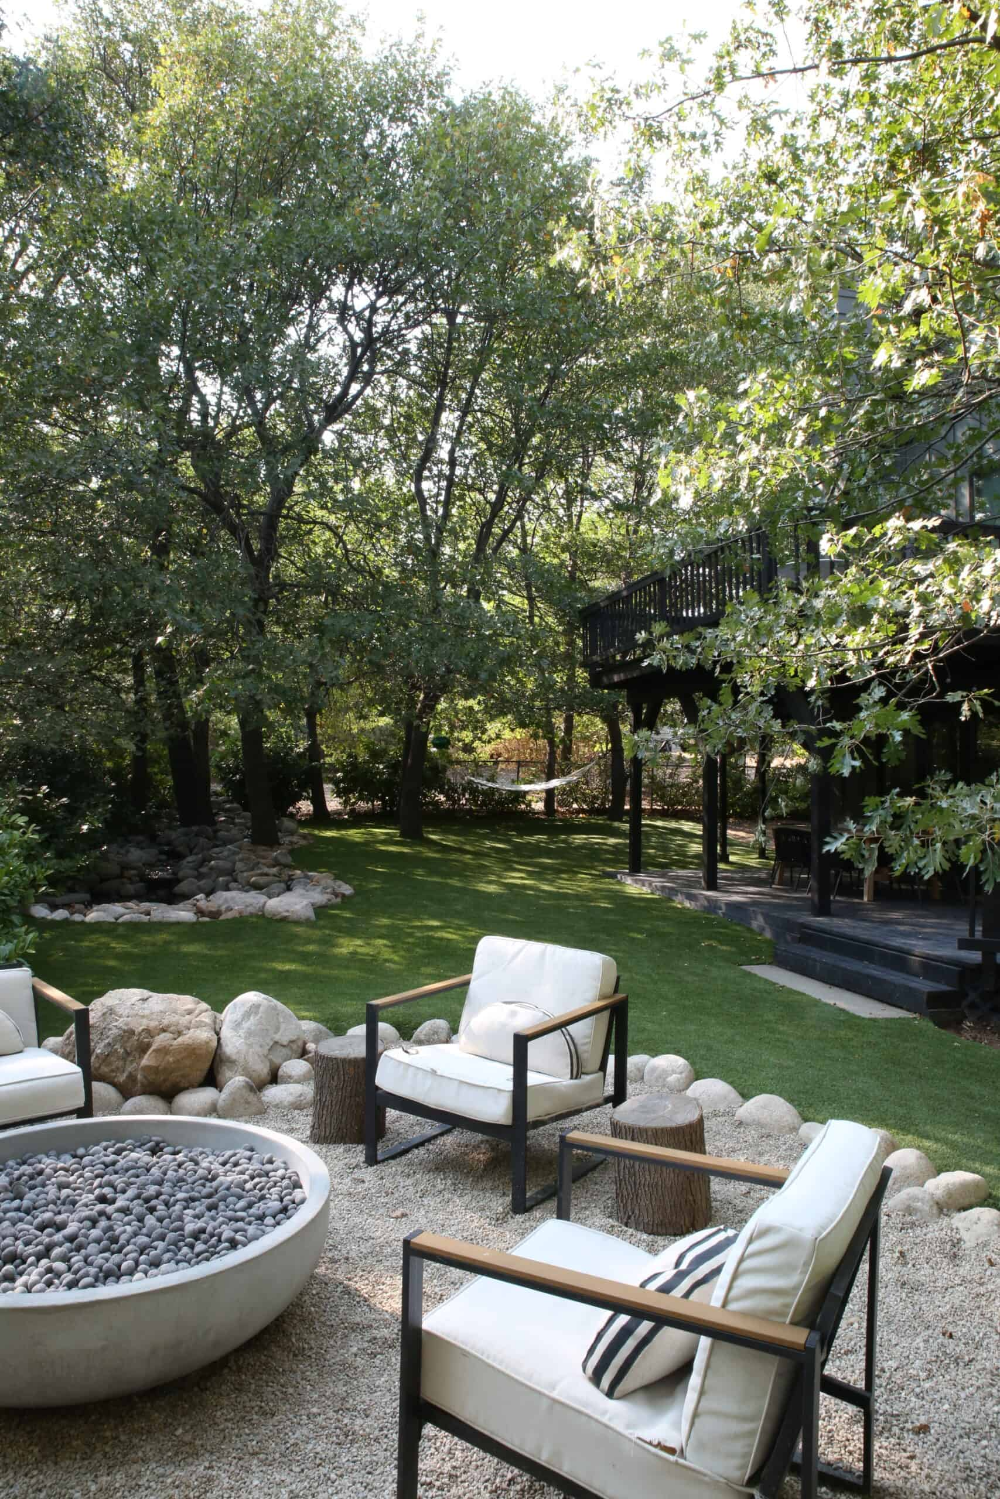 Creating Stunning Outdoor Spaces: The Art of Landscape Design